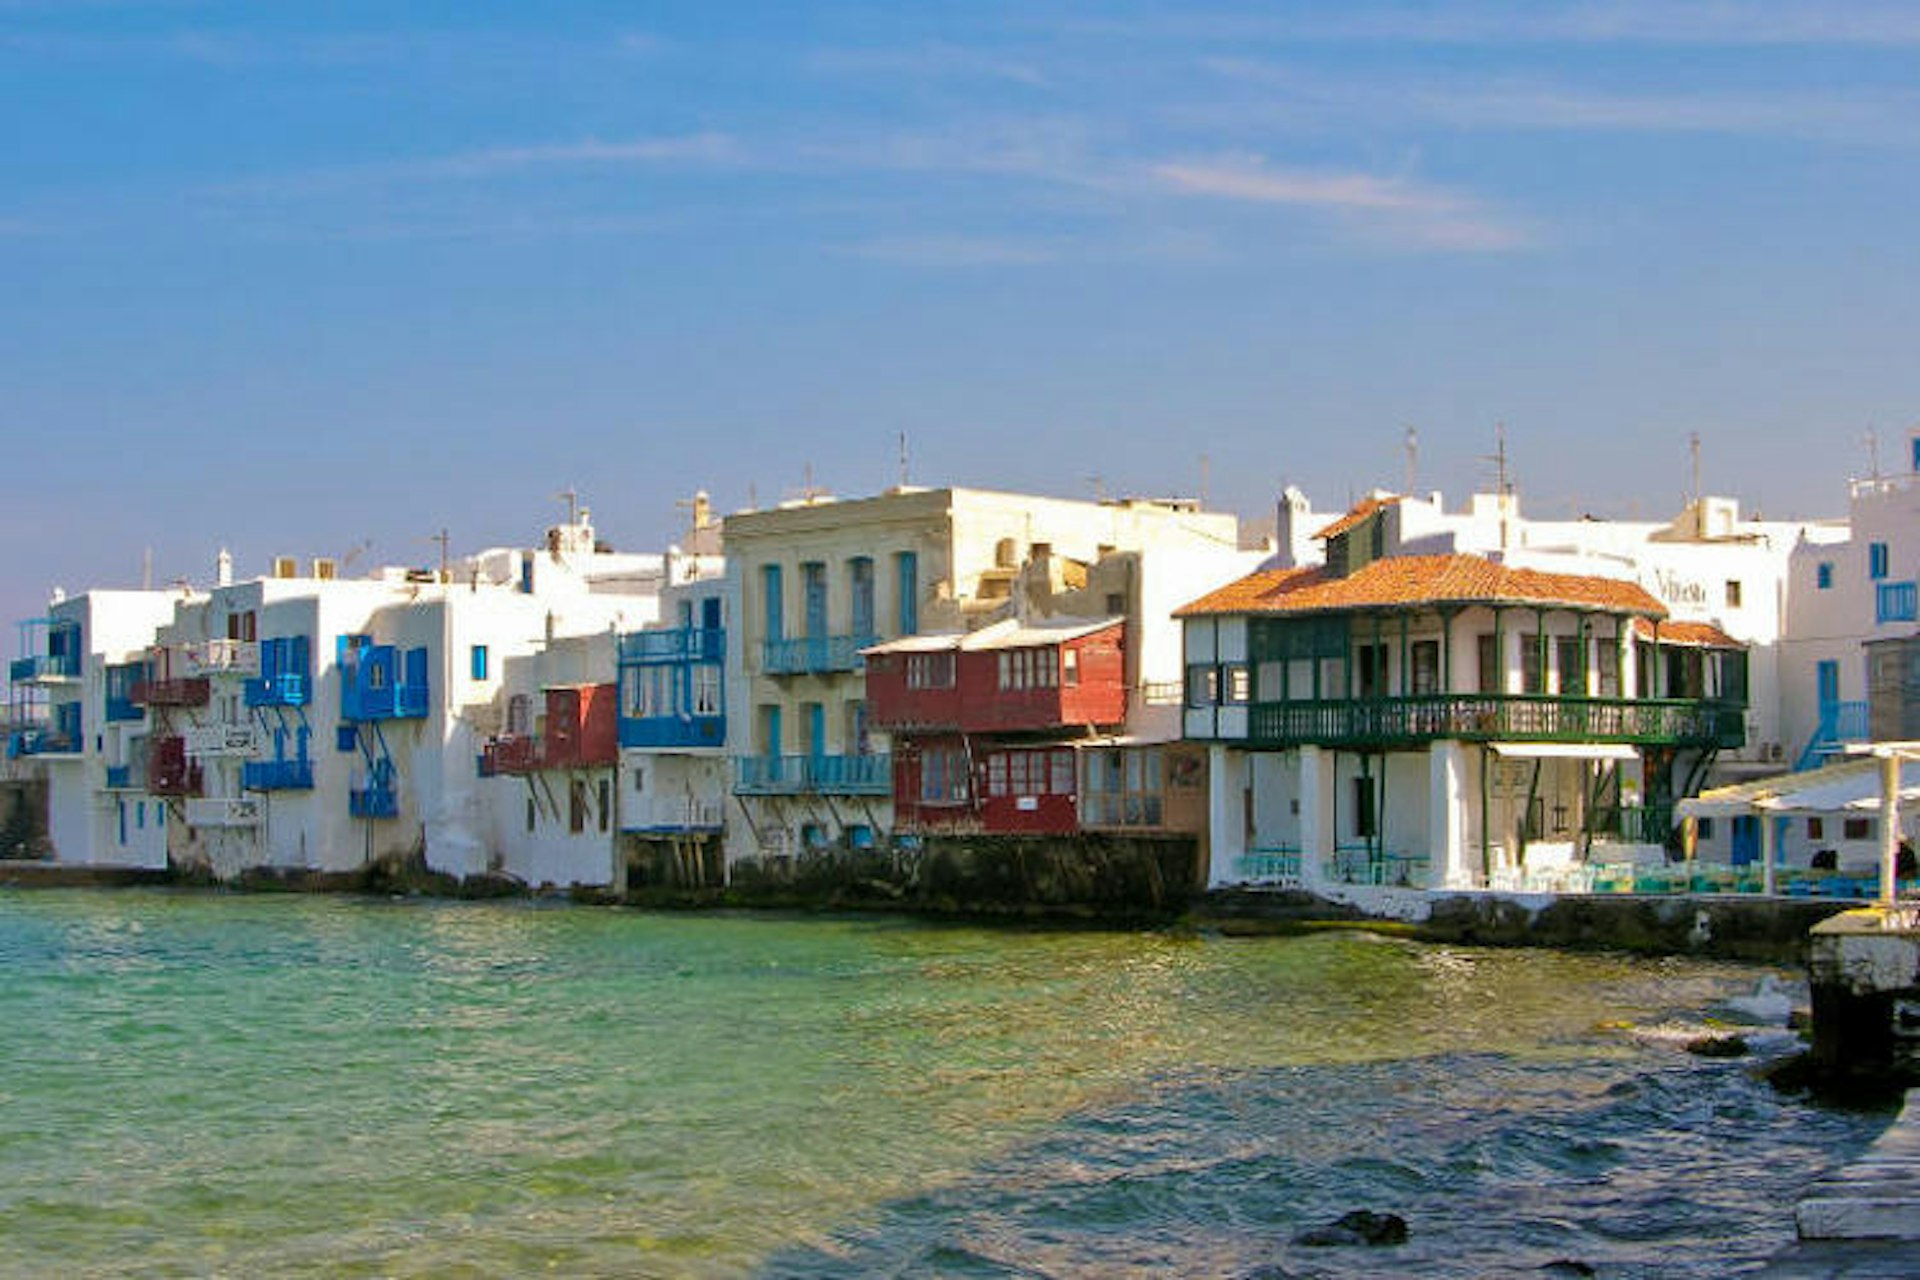 Dazzling Mykonos sets the scene for Bourne Identity and Shirley Valentine. Image by Julia Maudlin / CC BY 2.0